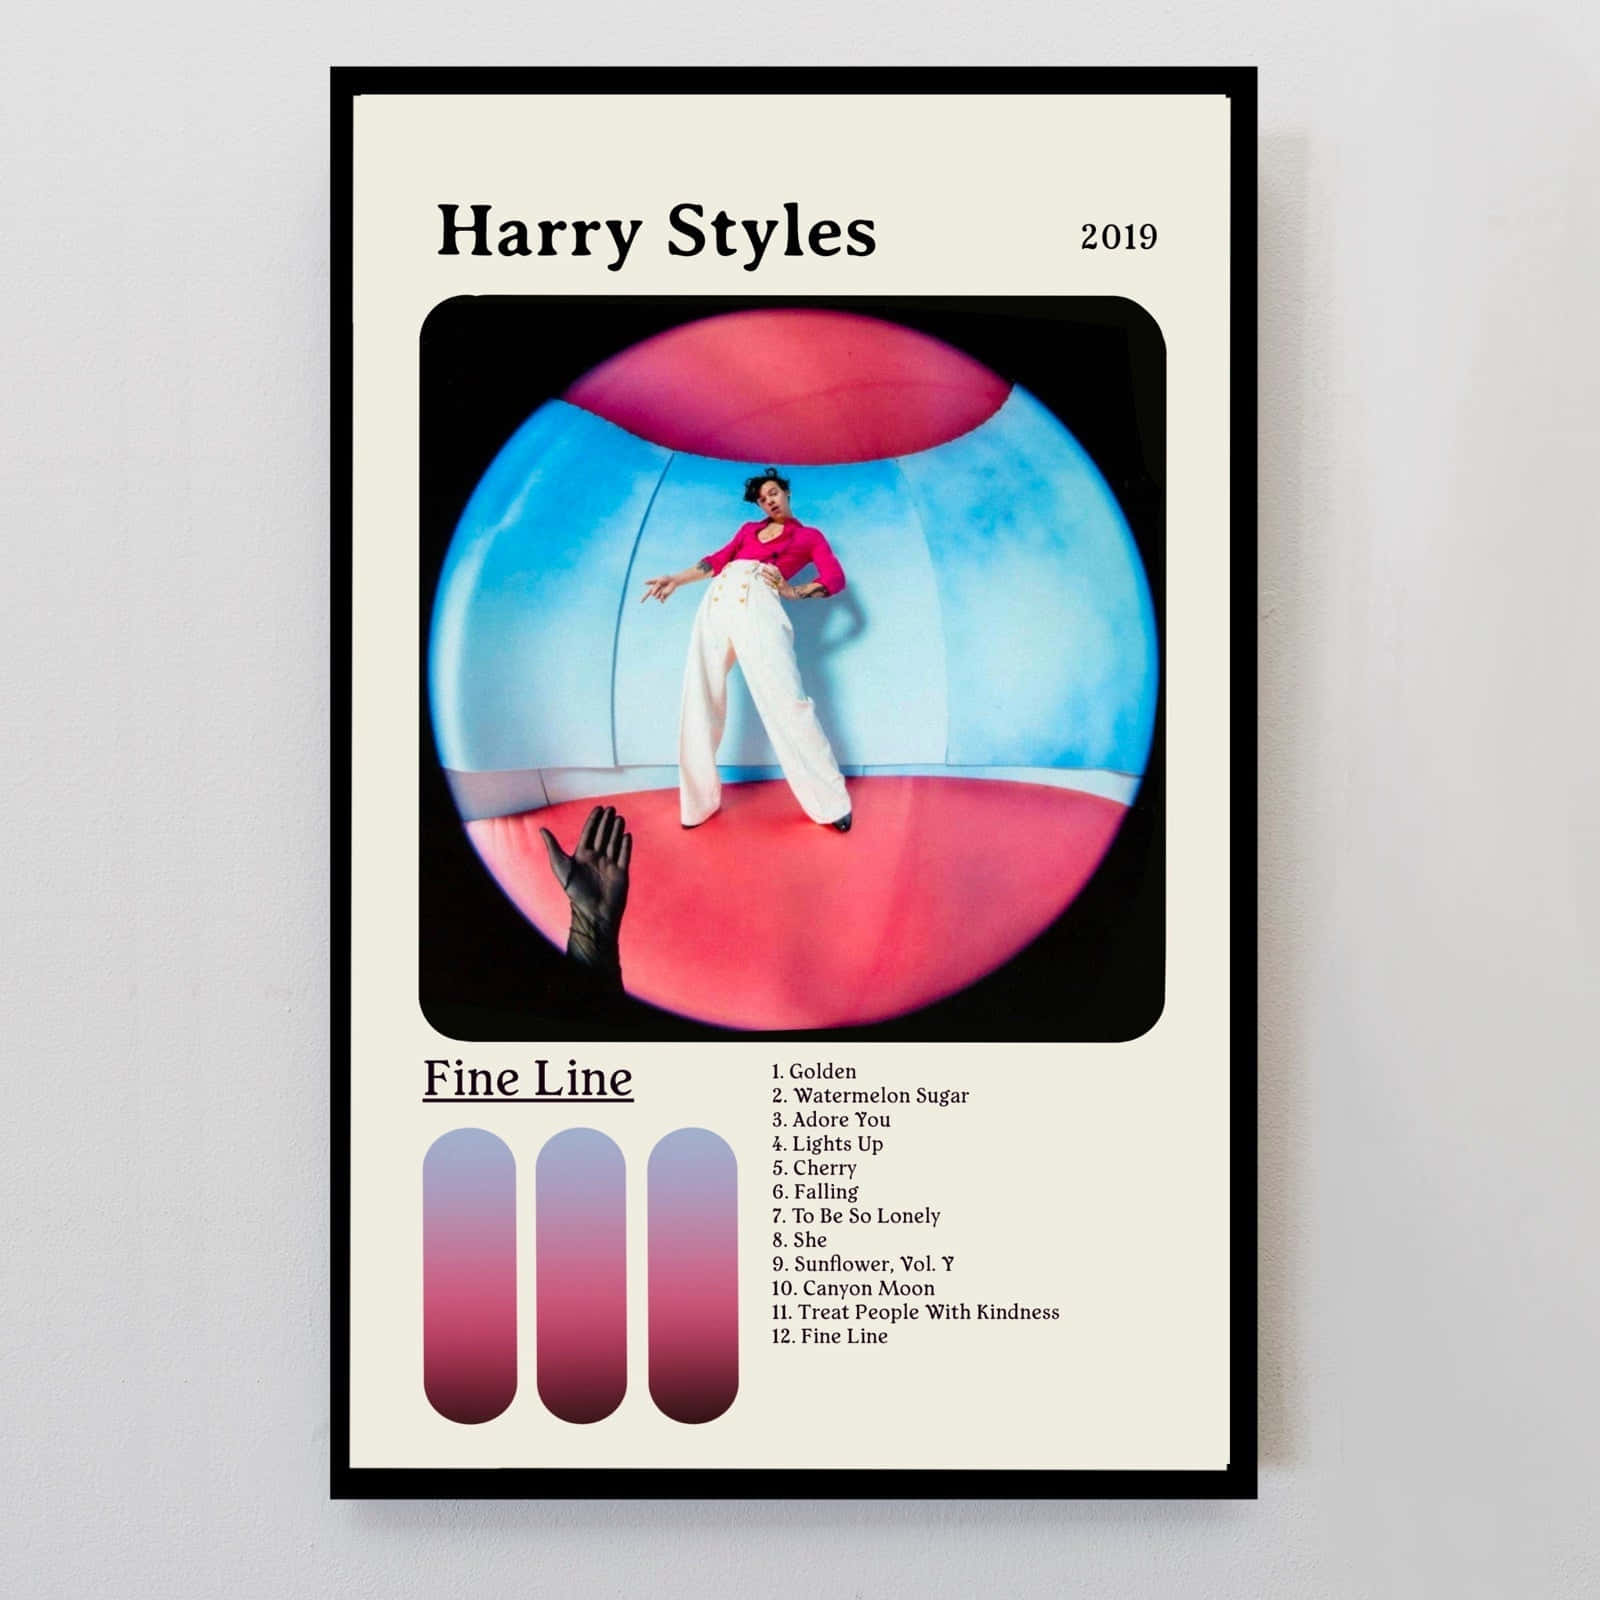 Harry Styles Strikes A Pose On The Cover Of His Self Titled Album. Wallpaper